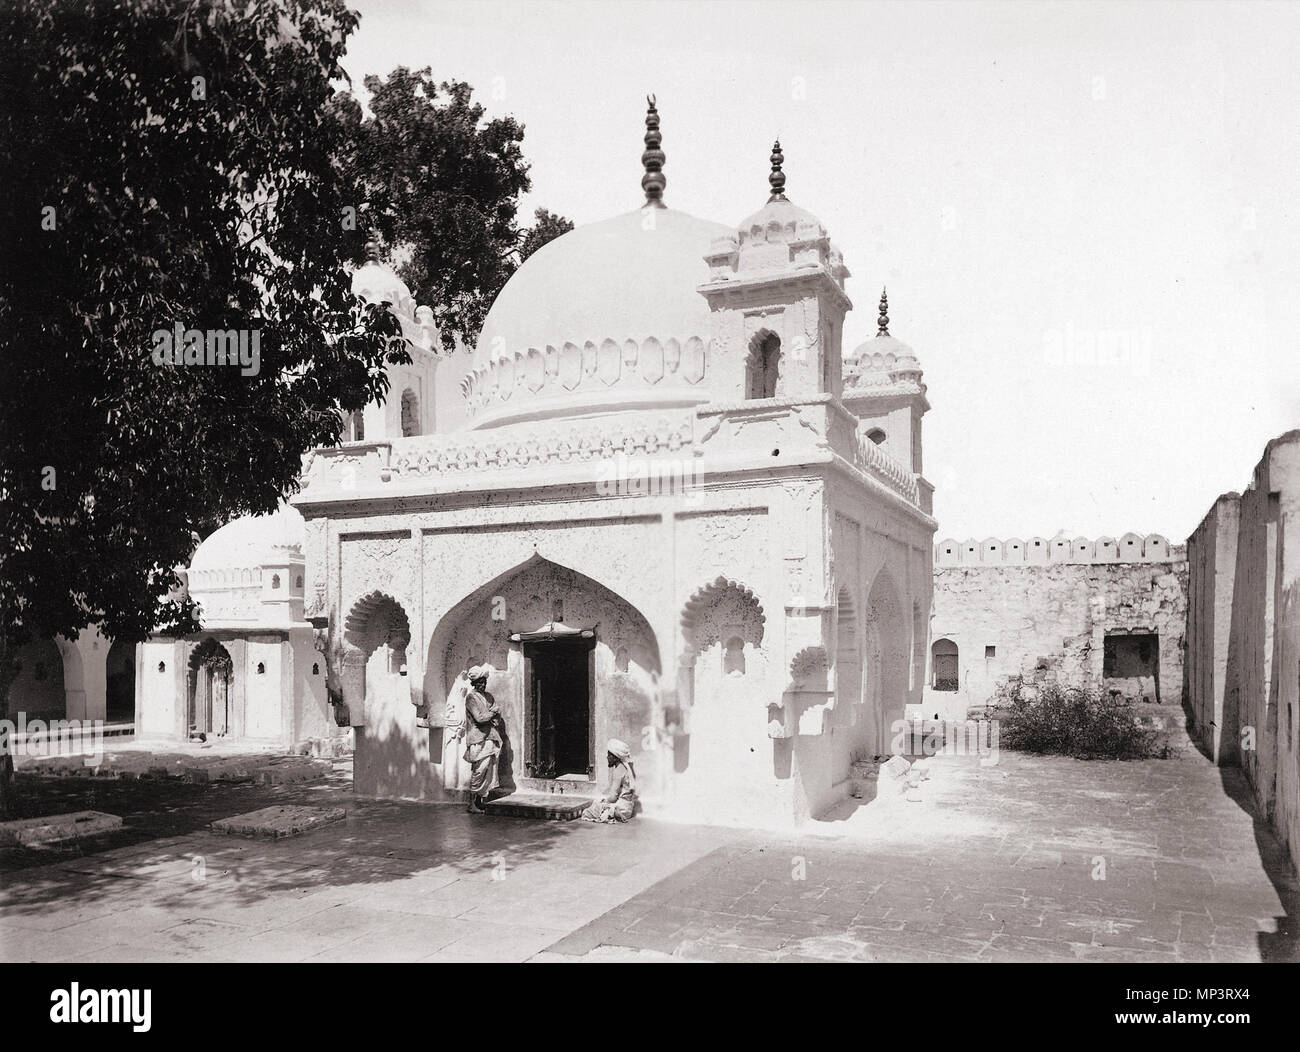 . English: Dargah of Zar Zari Baksh from the inner courtyard, from the Curzon Collection: 'Views of Caves of Ellora and Dowlatabad Fort in H.H. the Nizam's Dominions' taken by Deen Dayal in the 1890s. Rauza or Khuldabad. Zar Zari Bakhah’s tomb contains many relics including a circular steel mirror on a pedestal presented by Tana Shah of Golconda. 1890.   Lala Deen Dayal  (1844–1905)     Alternative names Raja Deen Dayal  Description Indian photographer  Date of birth/death 1844 5 July 1905  Location of birth/death Sardhana Mumbai  Authority control  : Q1182338 VIAF: 94369161 ISNI: 0000 0000 81 Stock Photo